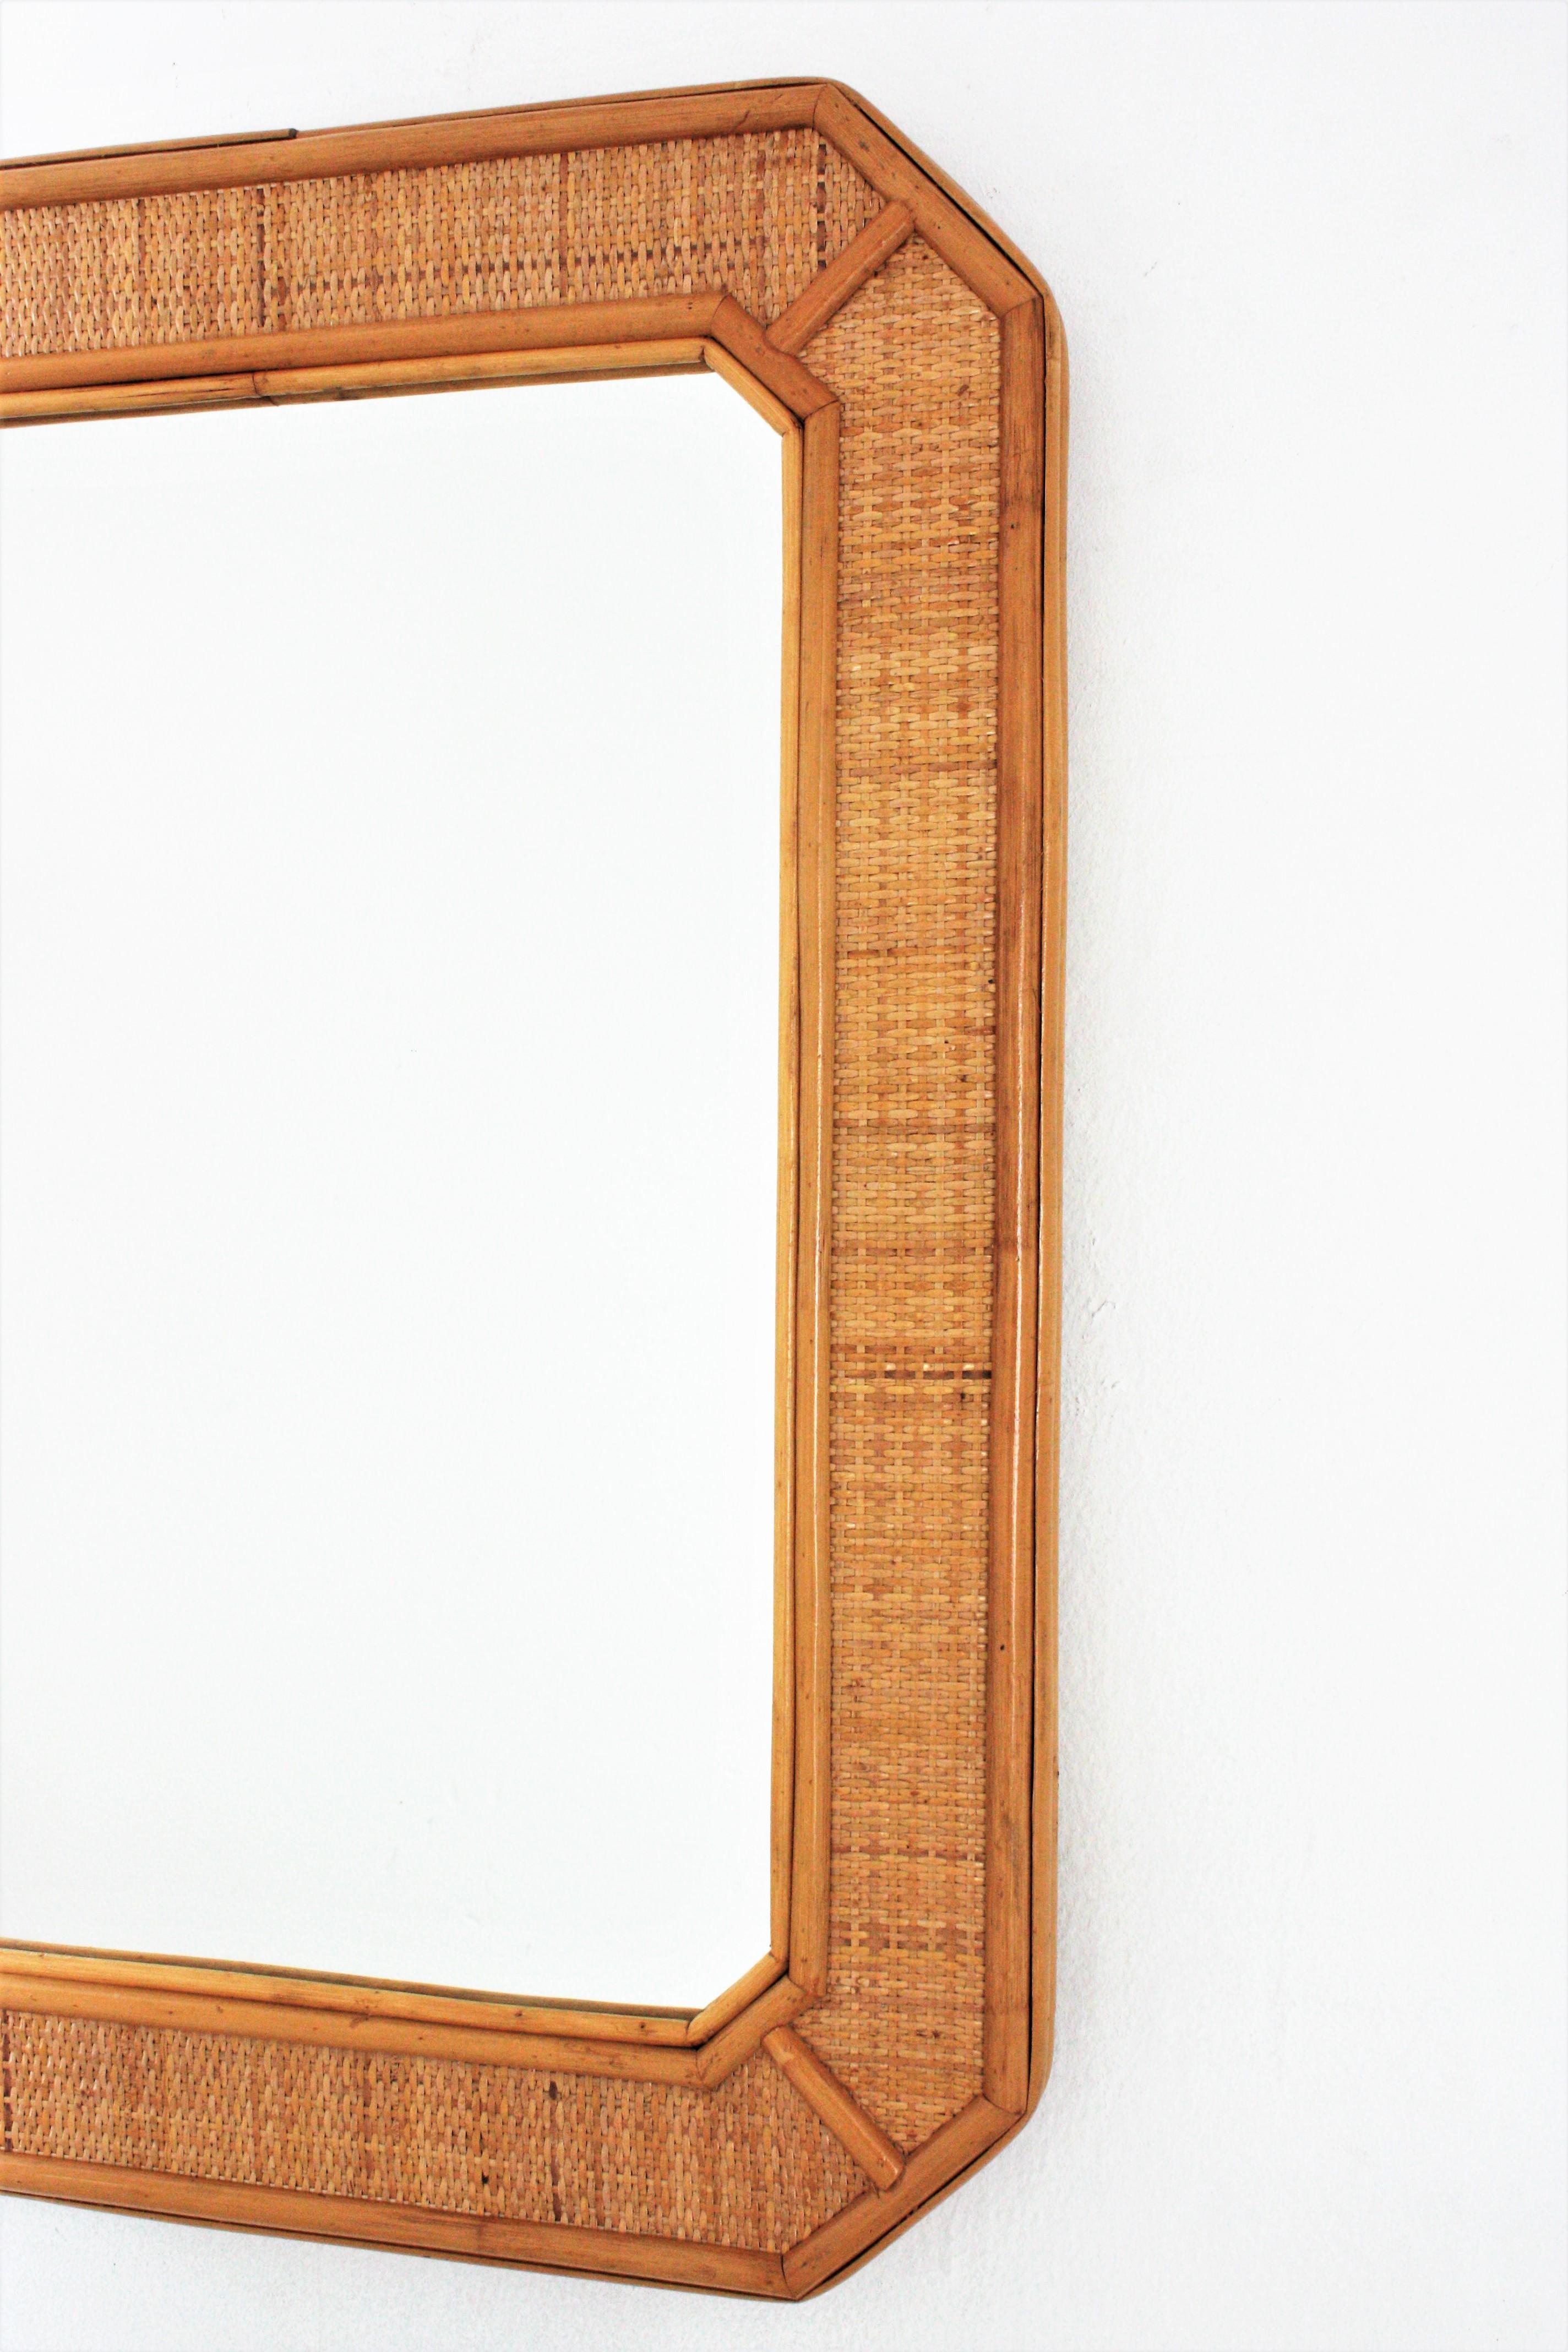 Italian Octagonal Wall Mirror in Rattan and Woven Wicker For Sale